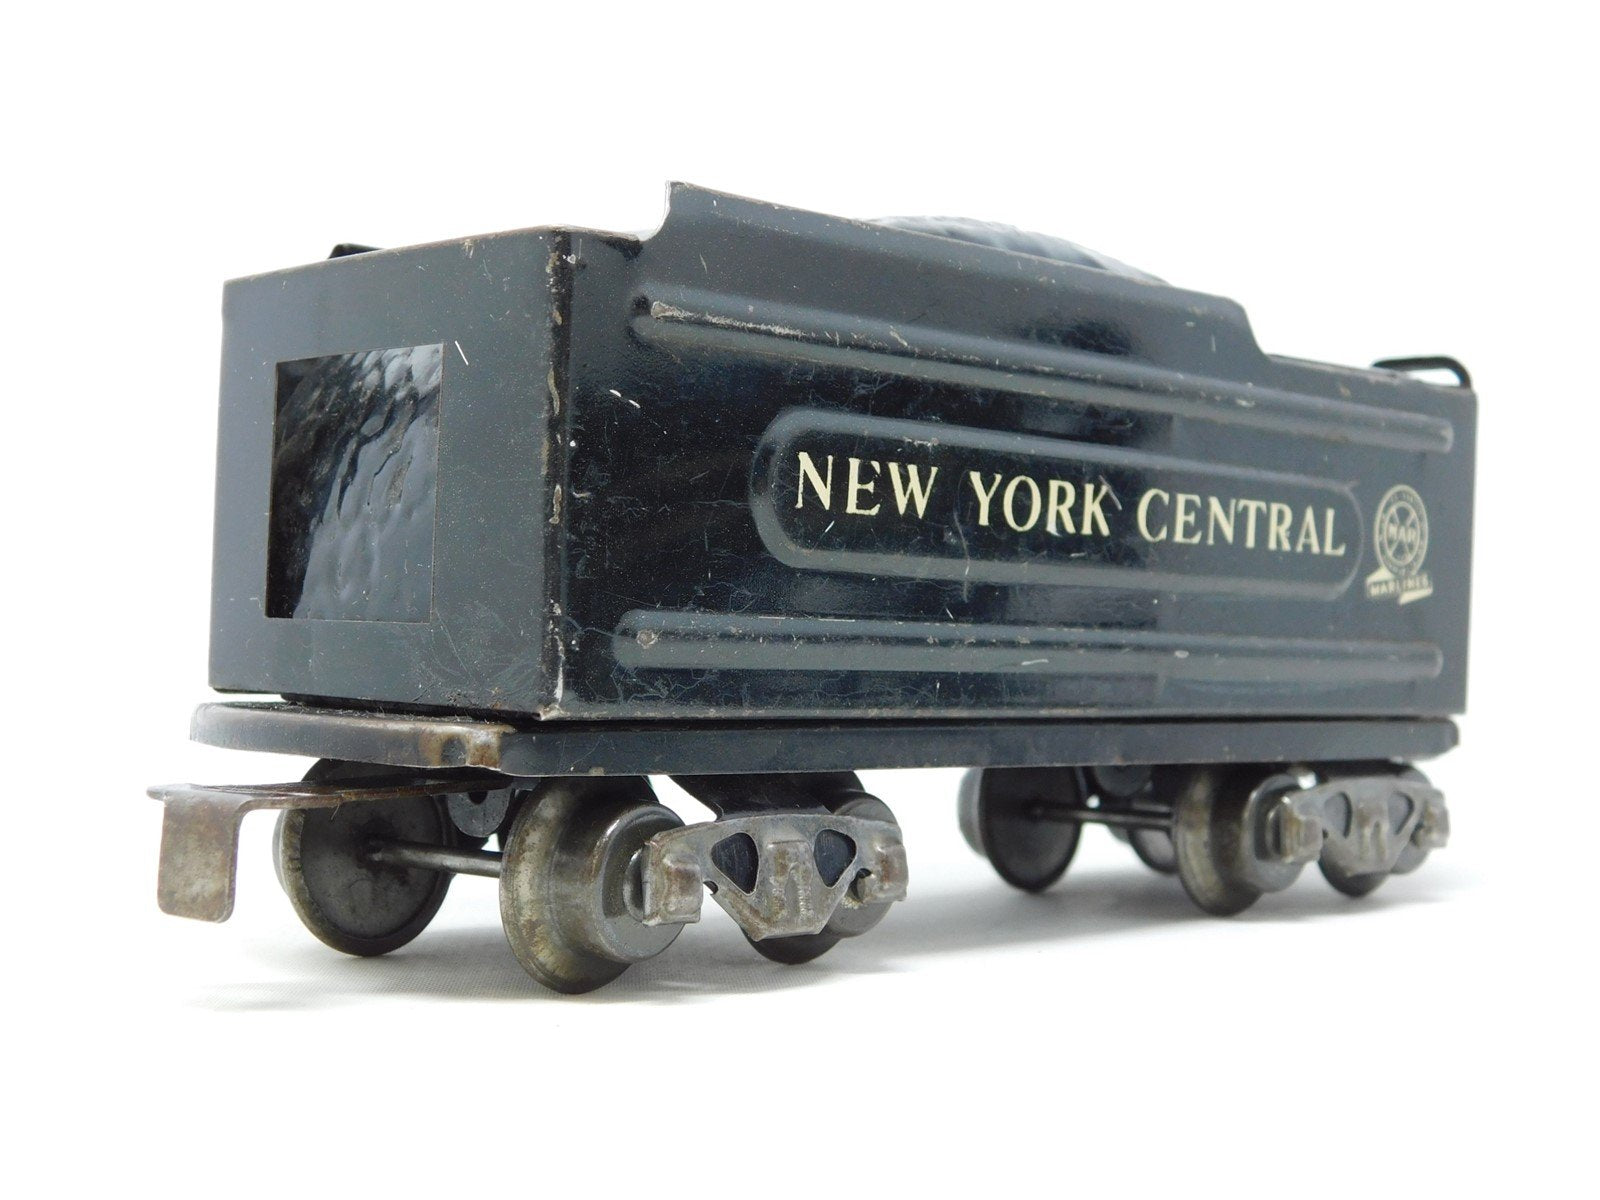 Sold at Auction: Group of 2 Marx O Scale Train Accessories